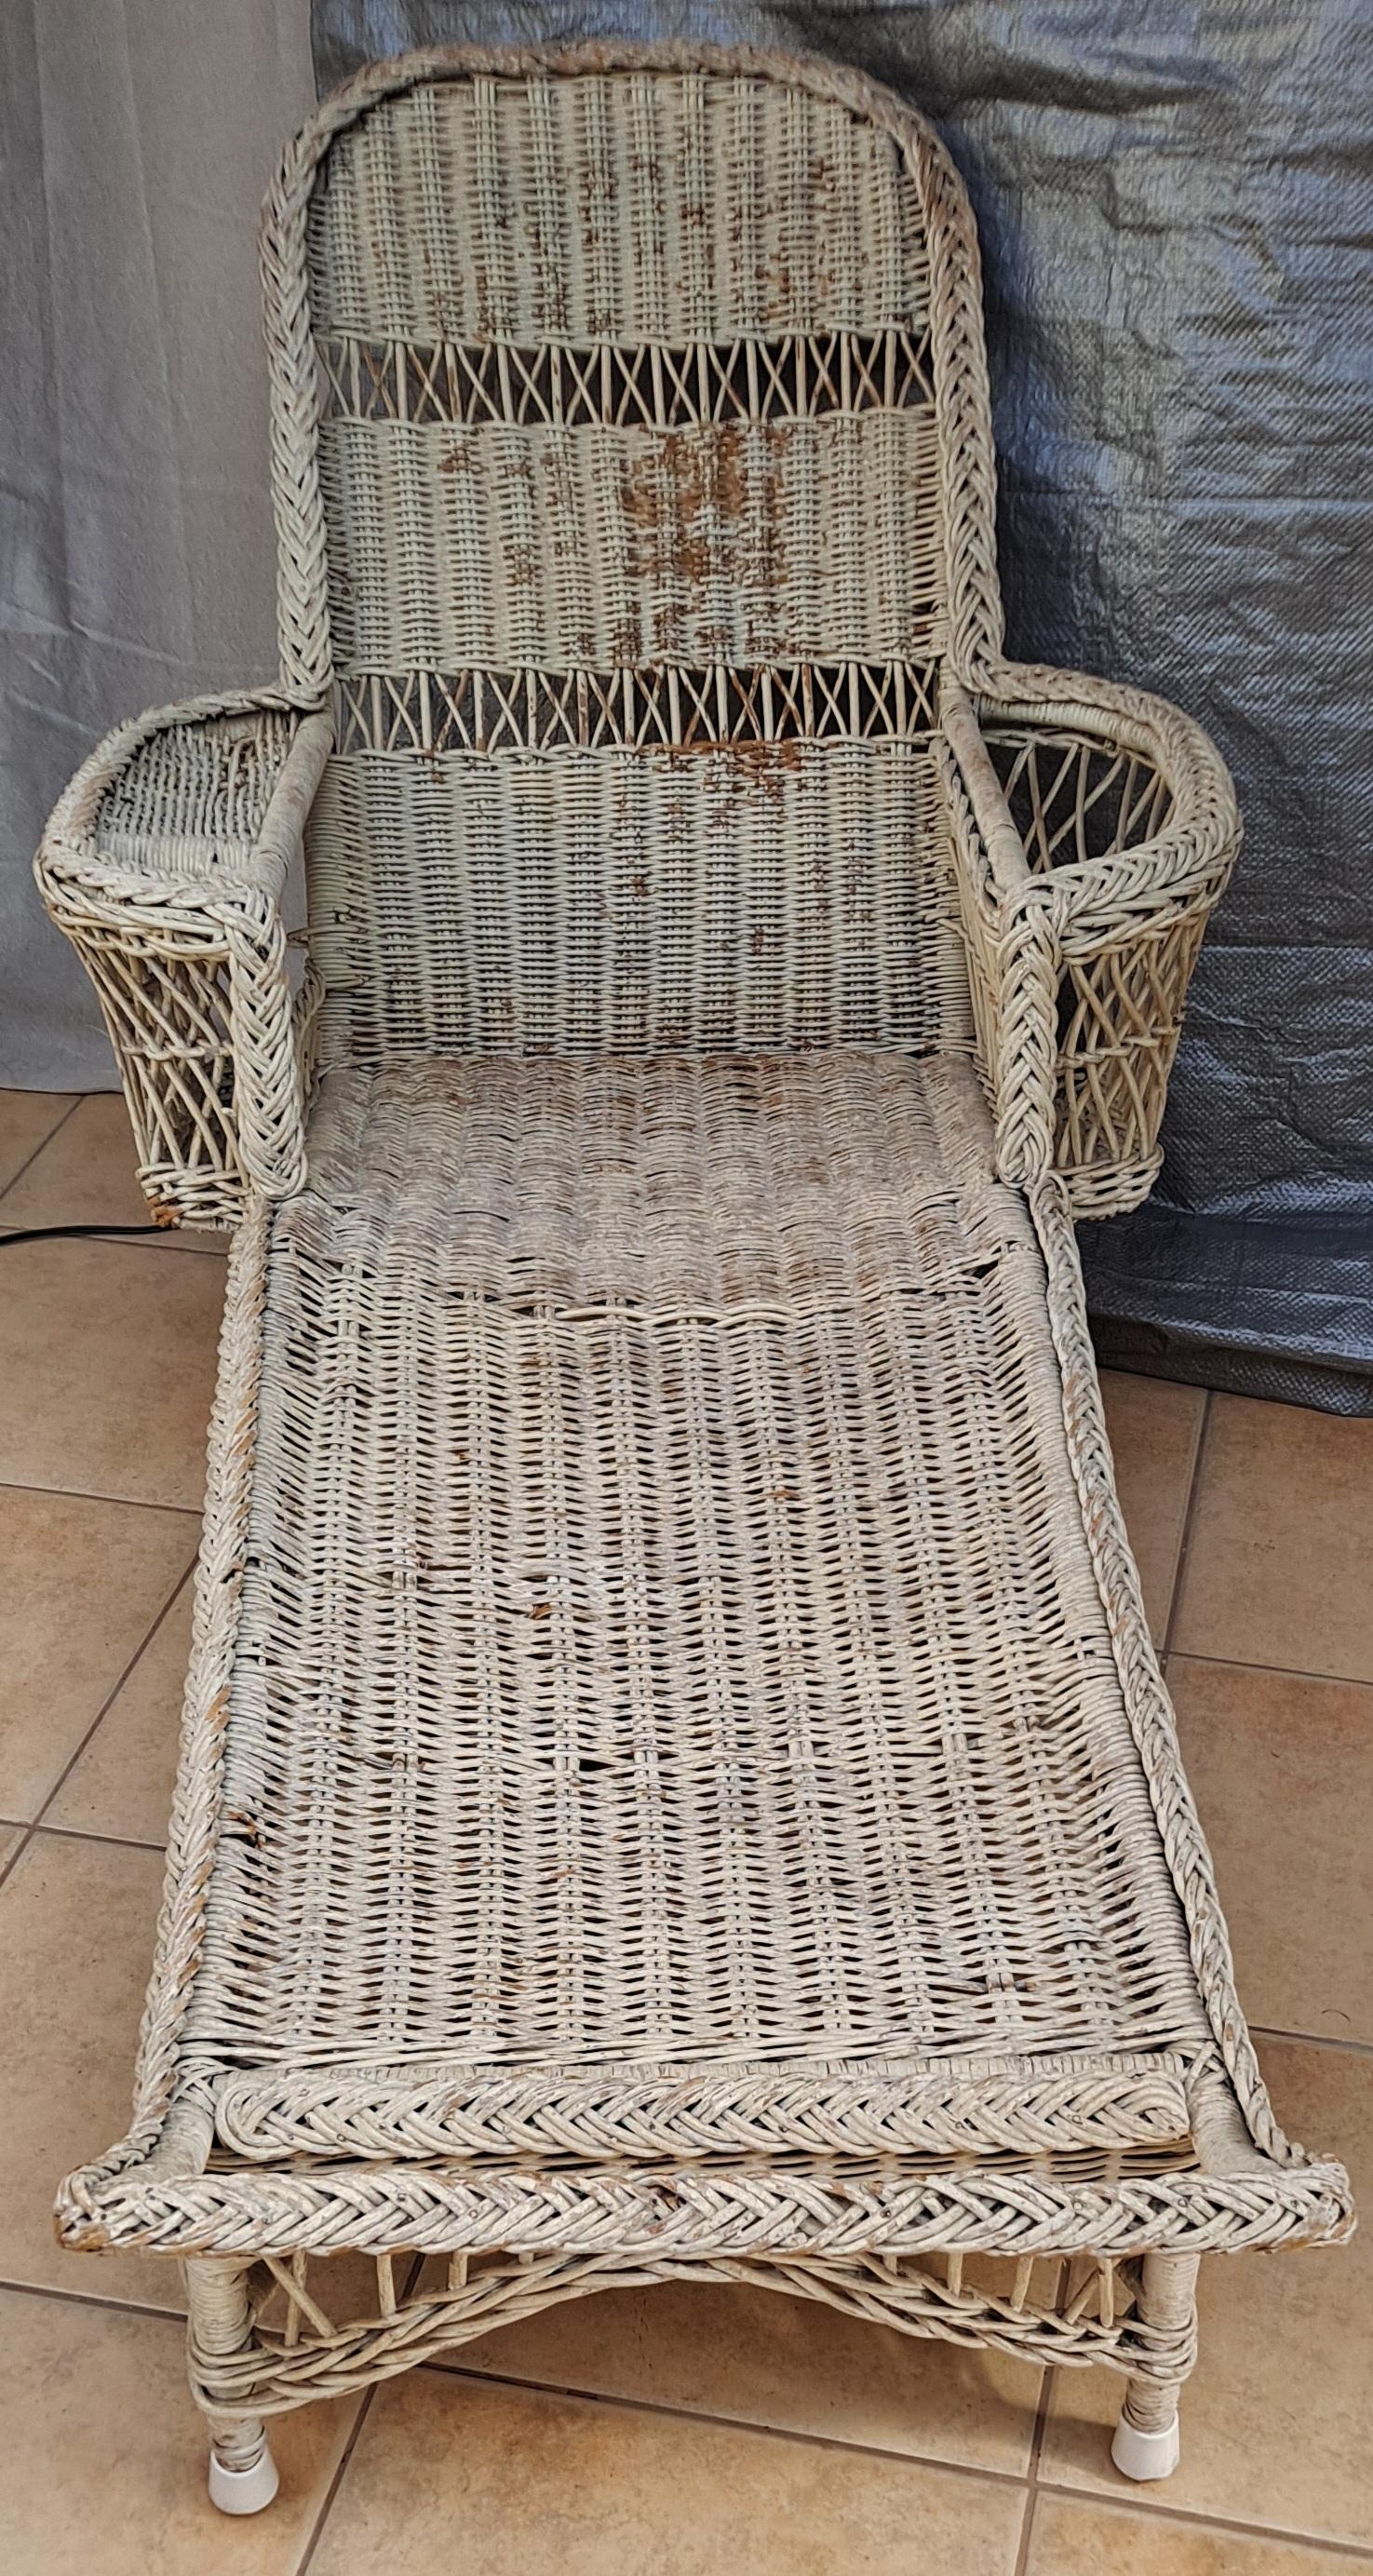 1920's White Wicker Chaise Lounge

60